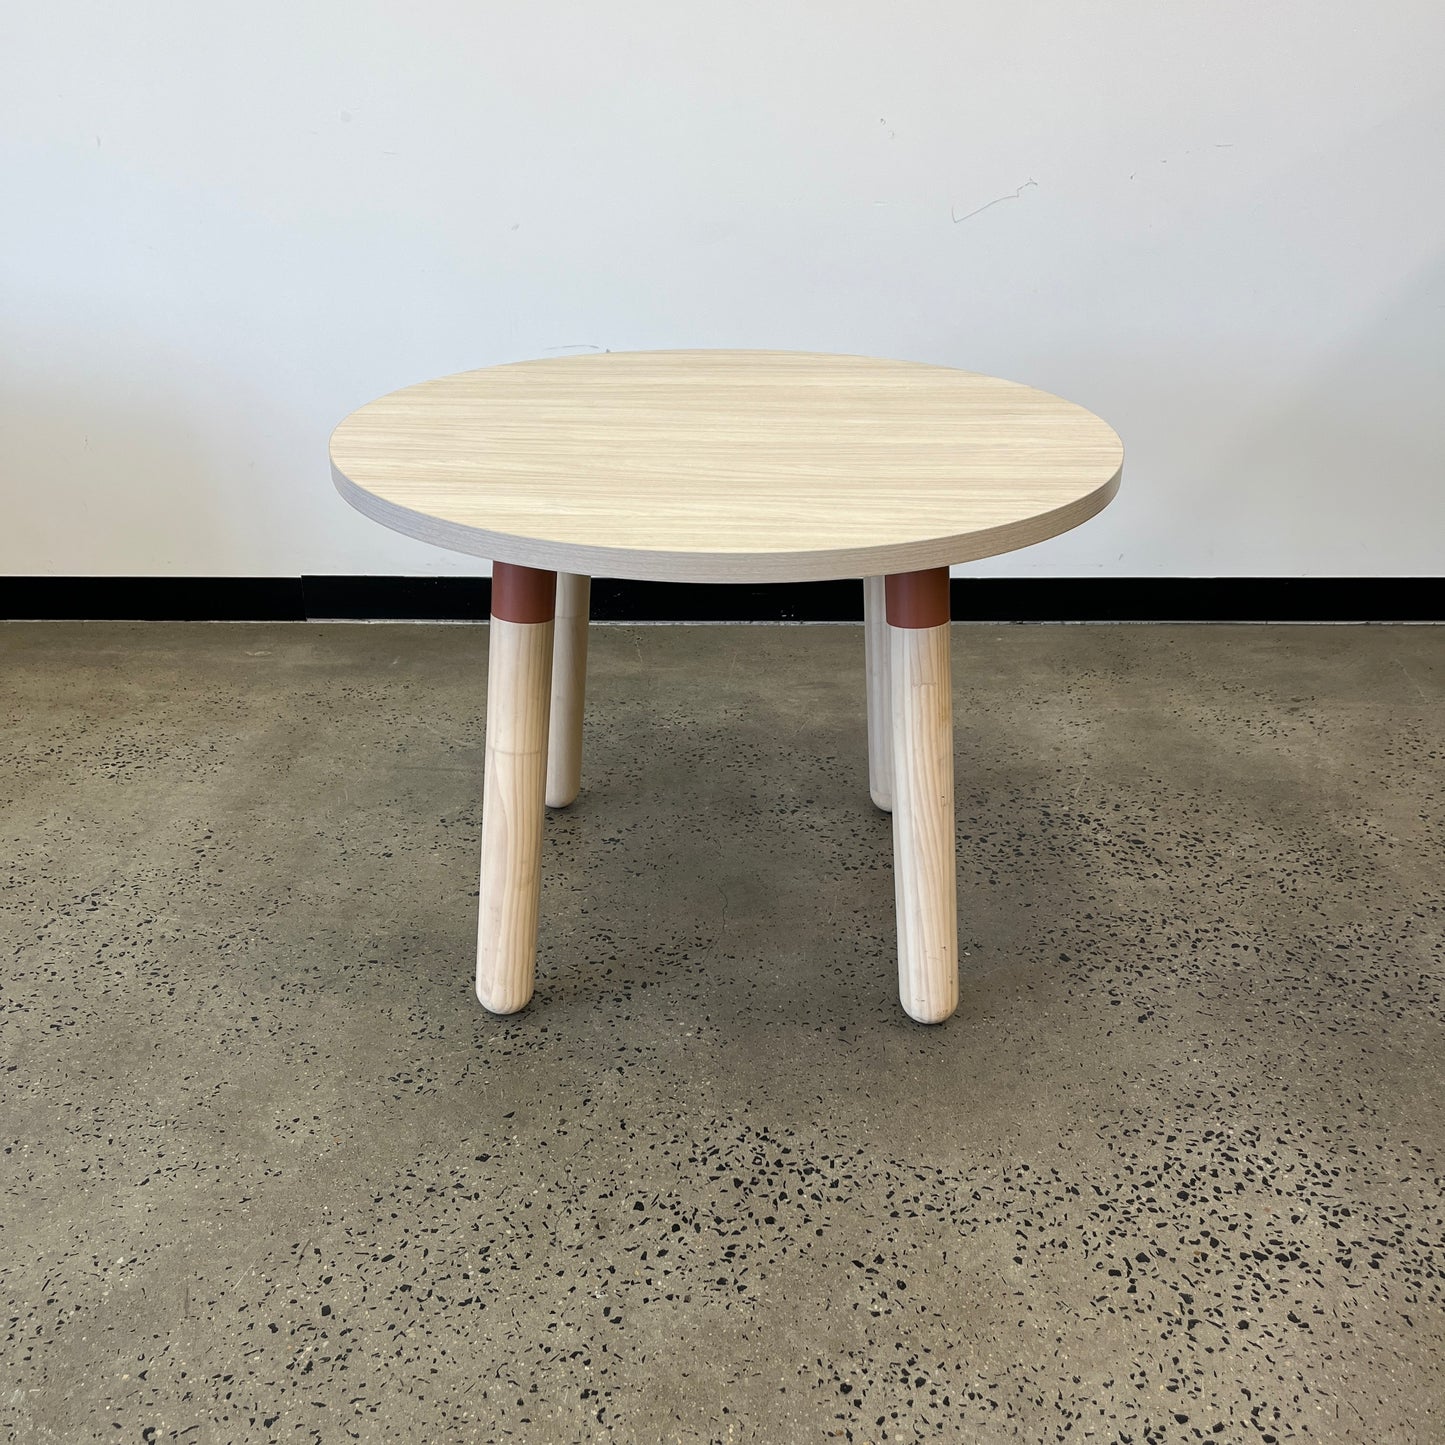 Koskela PBS Round Table Light Wood with Rounded Legs